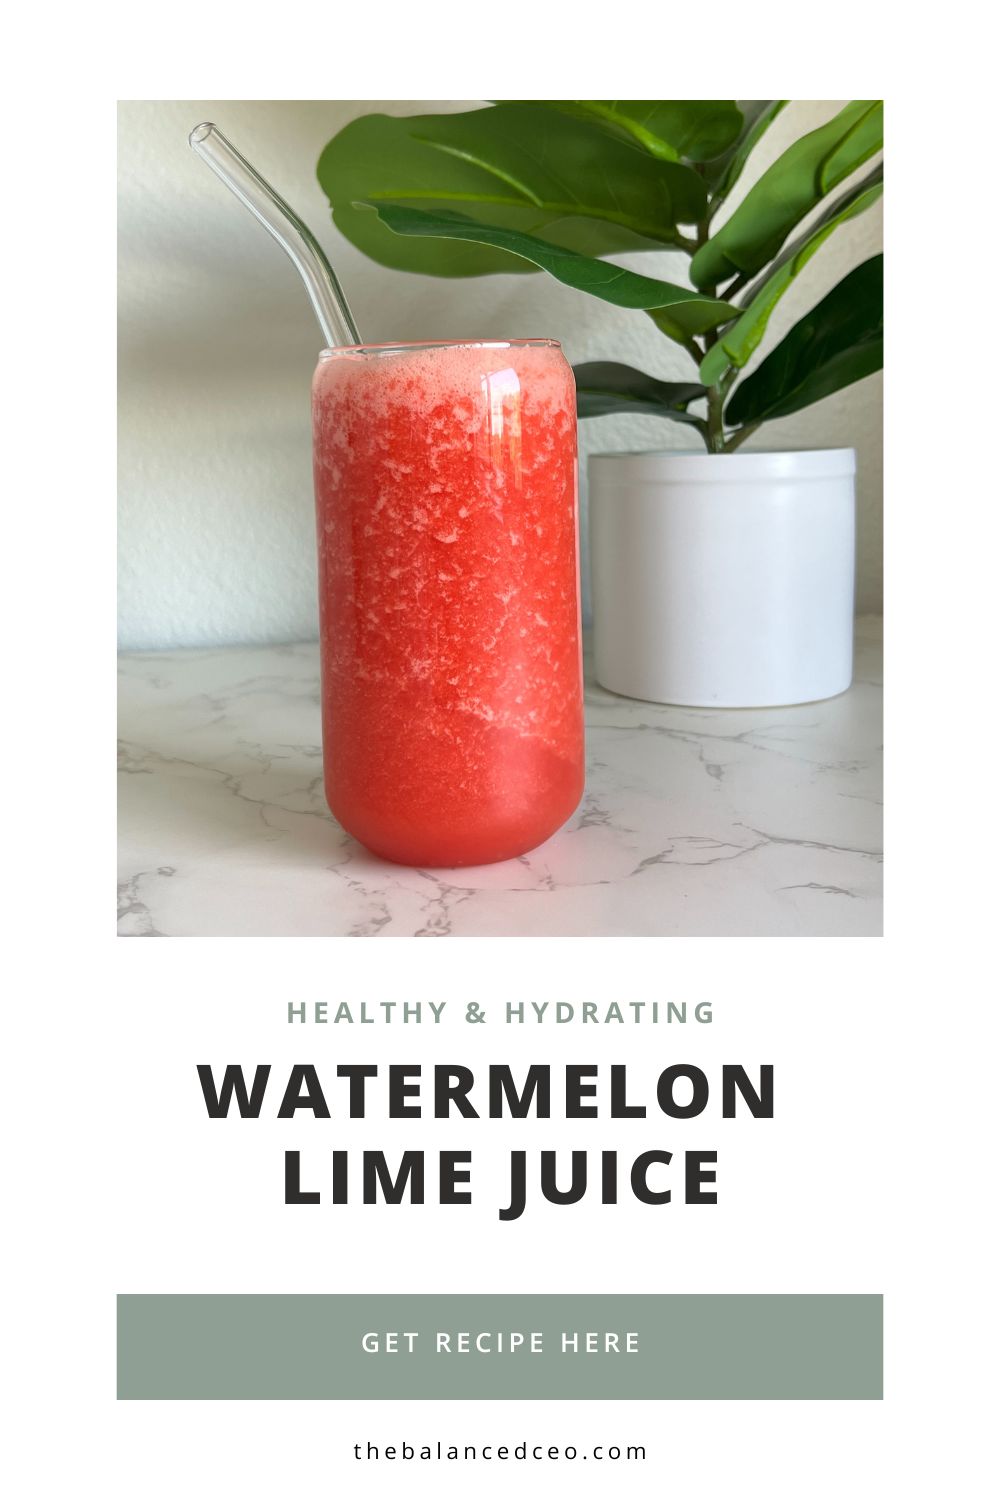 Healthy and Hydrating: Watermelon Lime Juice Recipe